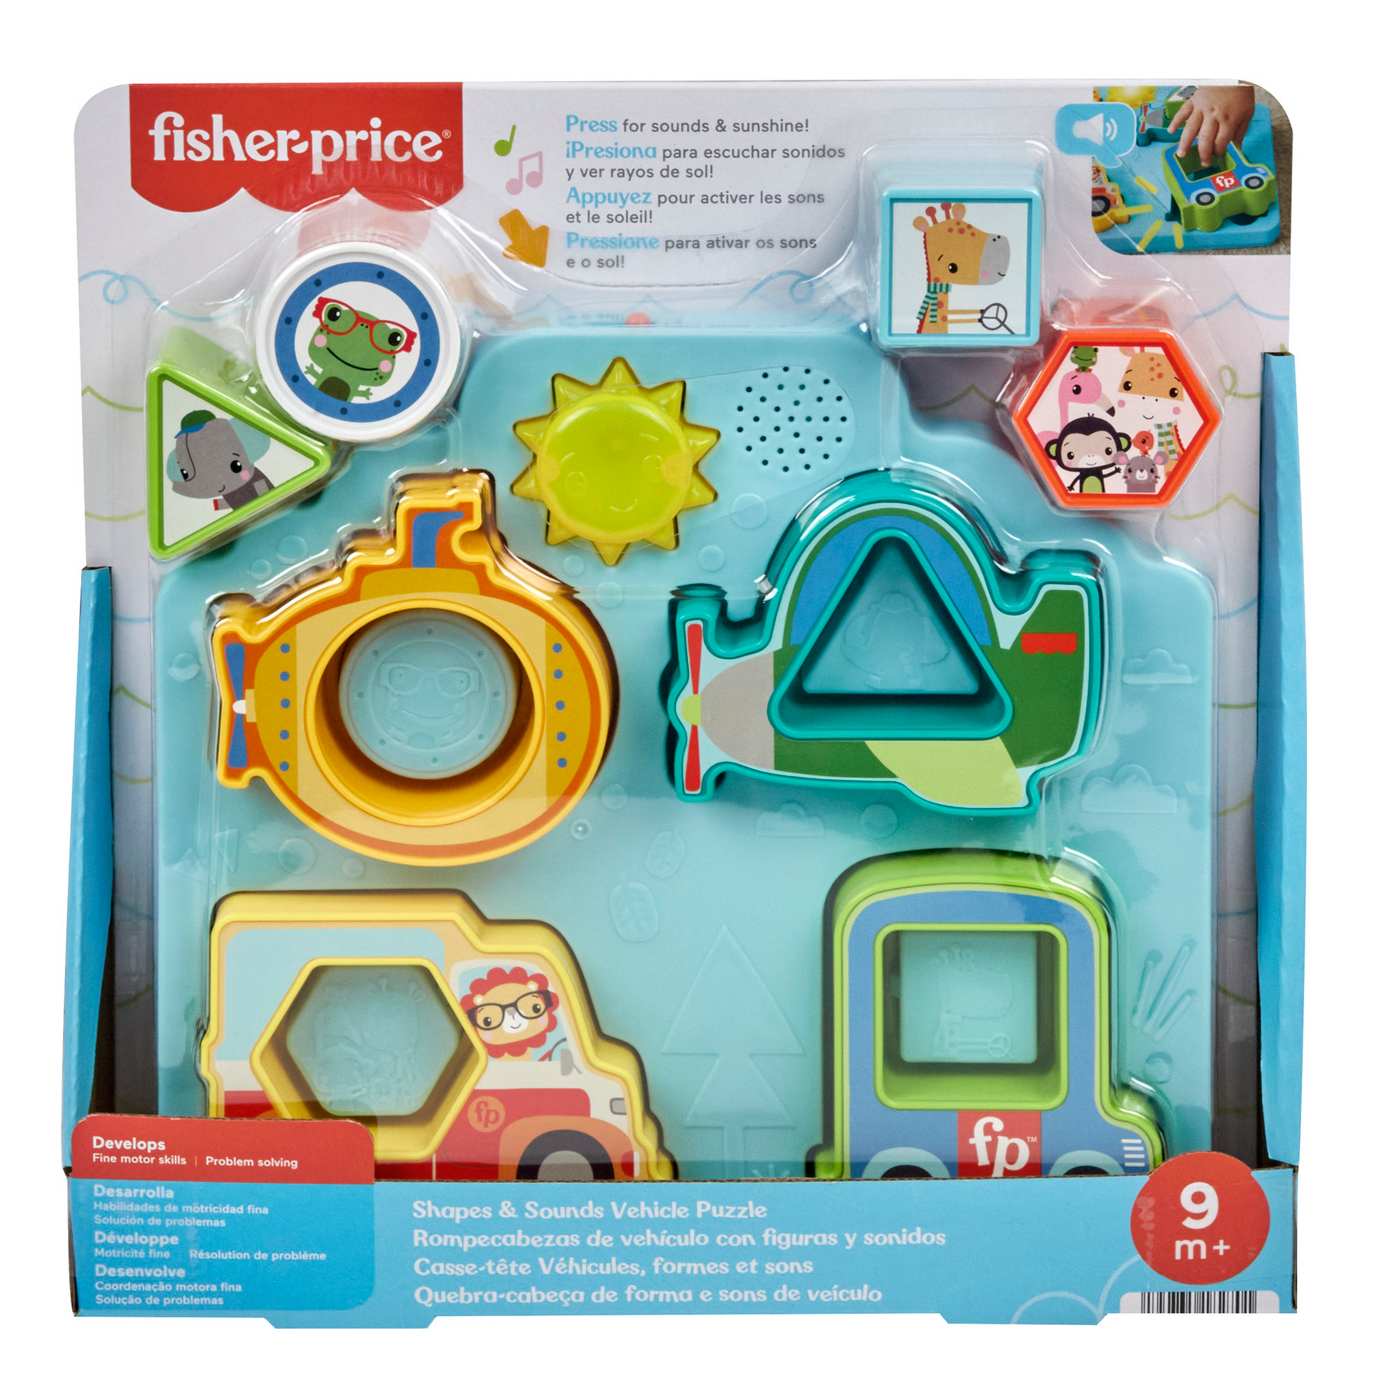 Fisher-Price Shapes & Sounds Vehicle Puzzle; image 1 of 2